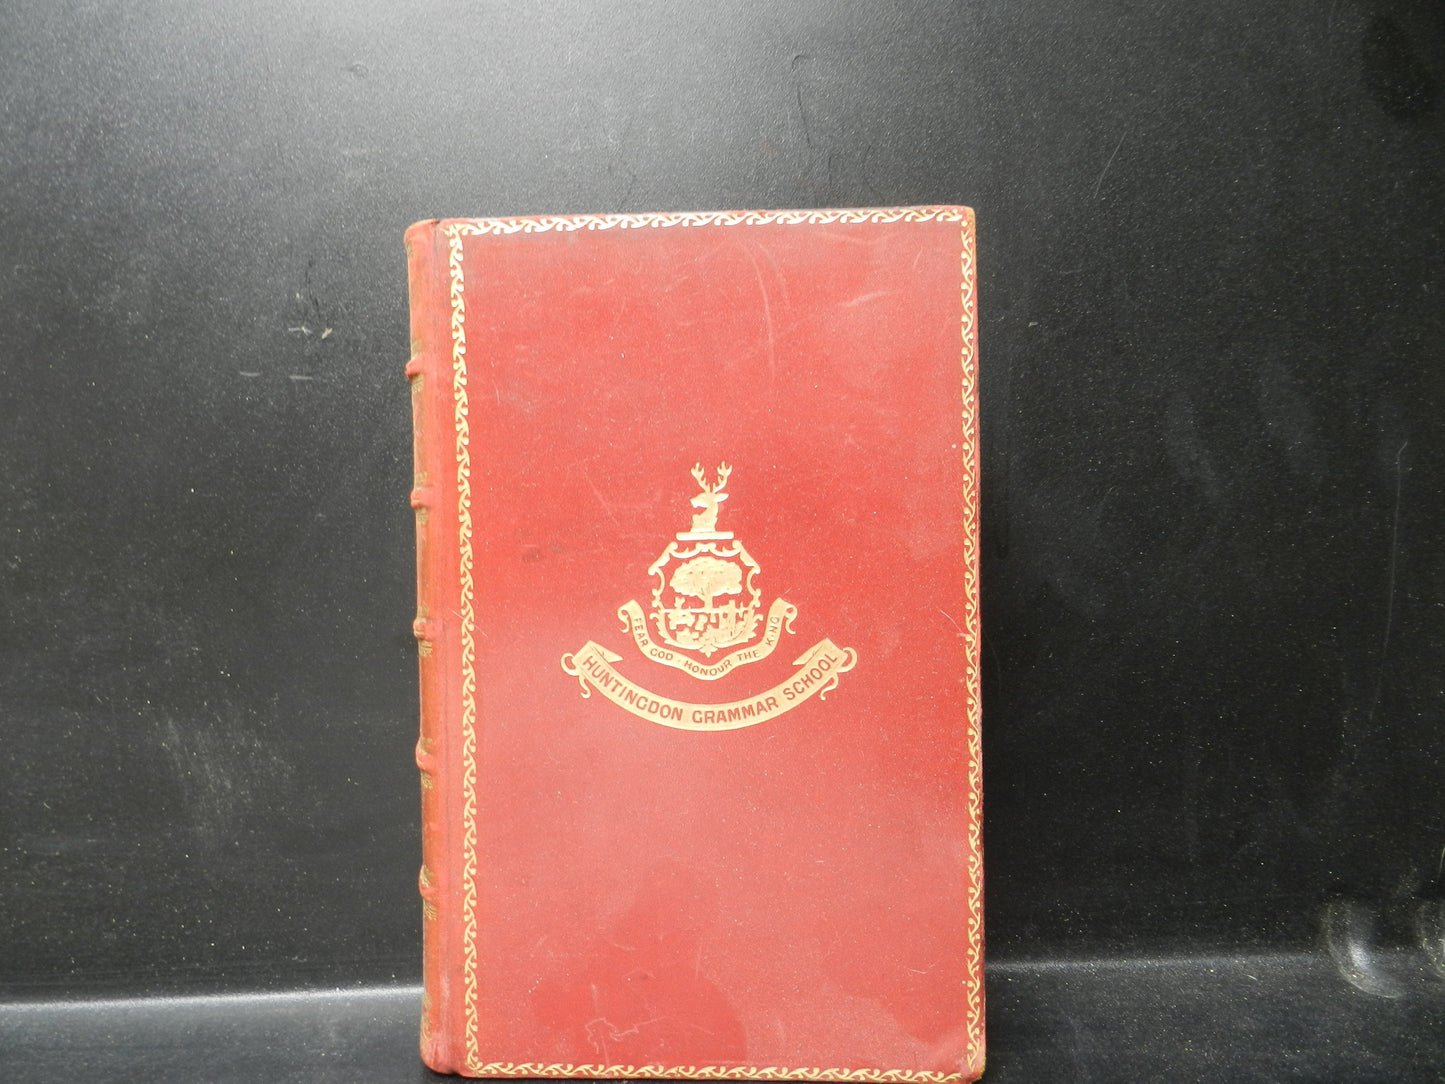 Antique Leather Bound Book "Science From An Easy Chair" by Sir Ray Lankester, 1920